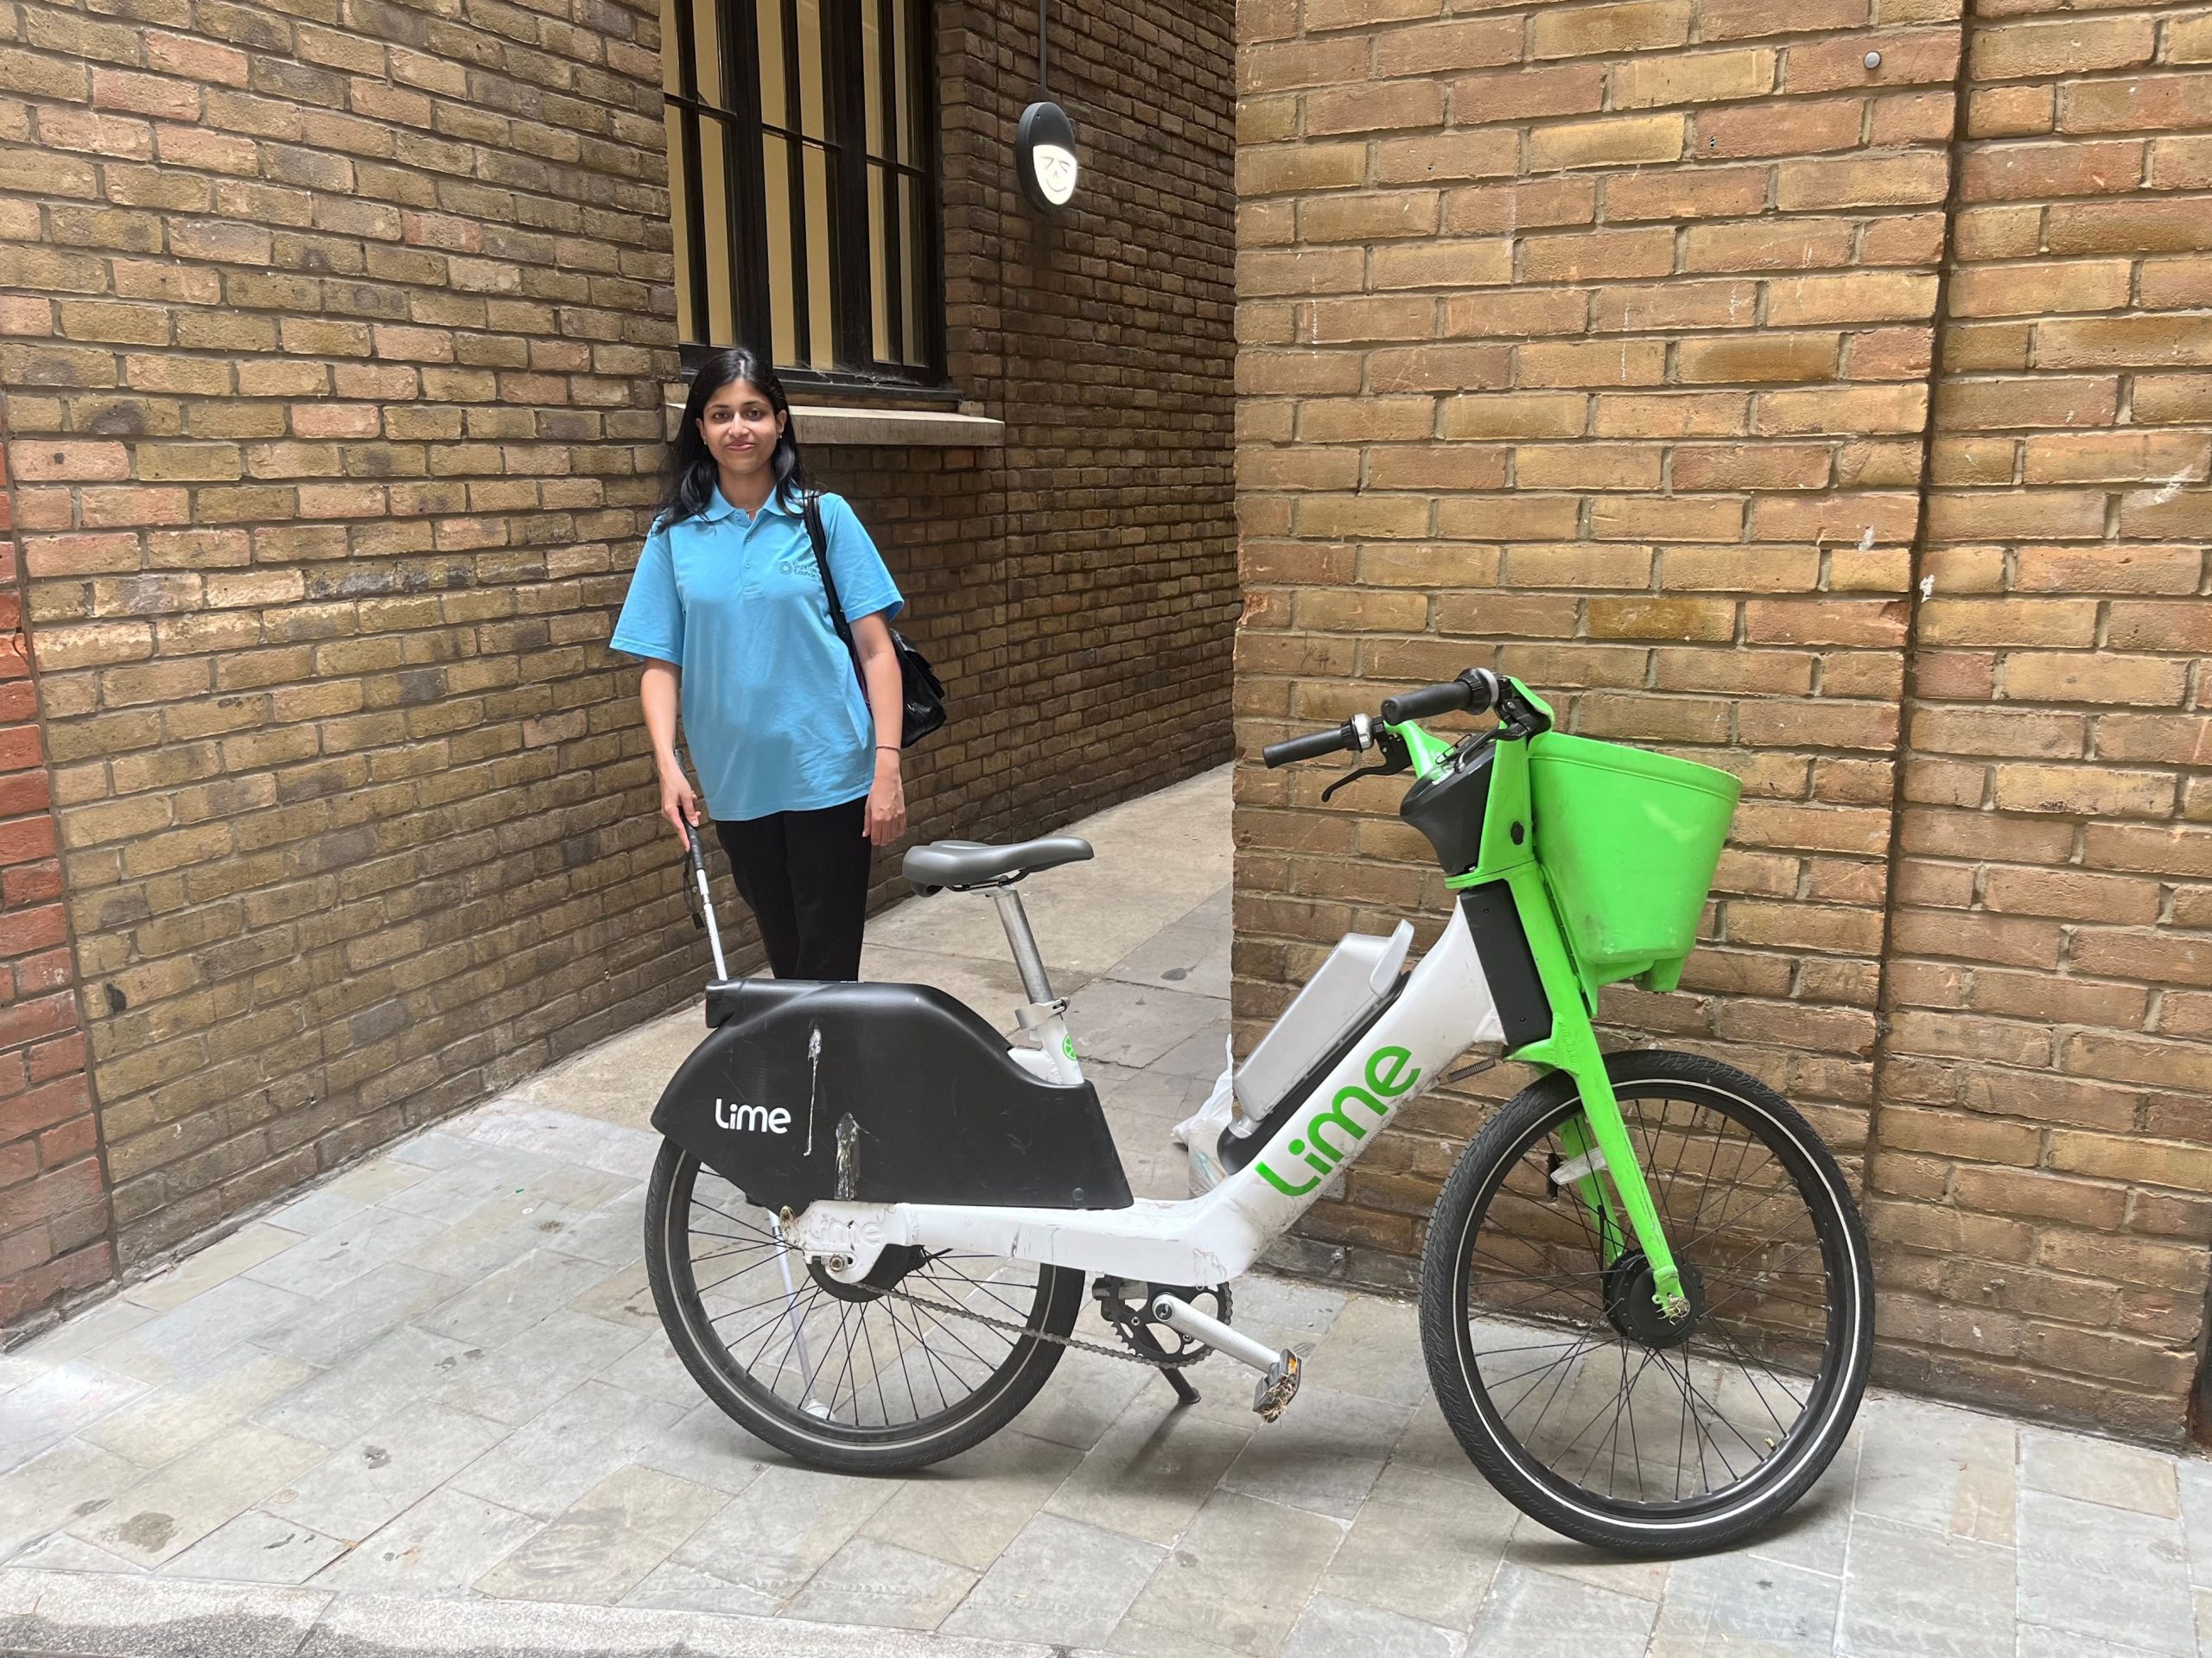 Vidya Nathan, London SLC member, is walking down an alley using her long cane. The path is obstructed by a Lime bike, which has been parked across the entrance.